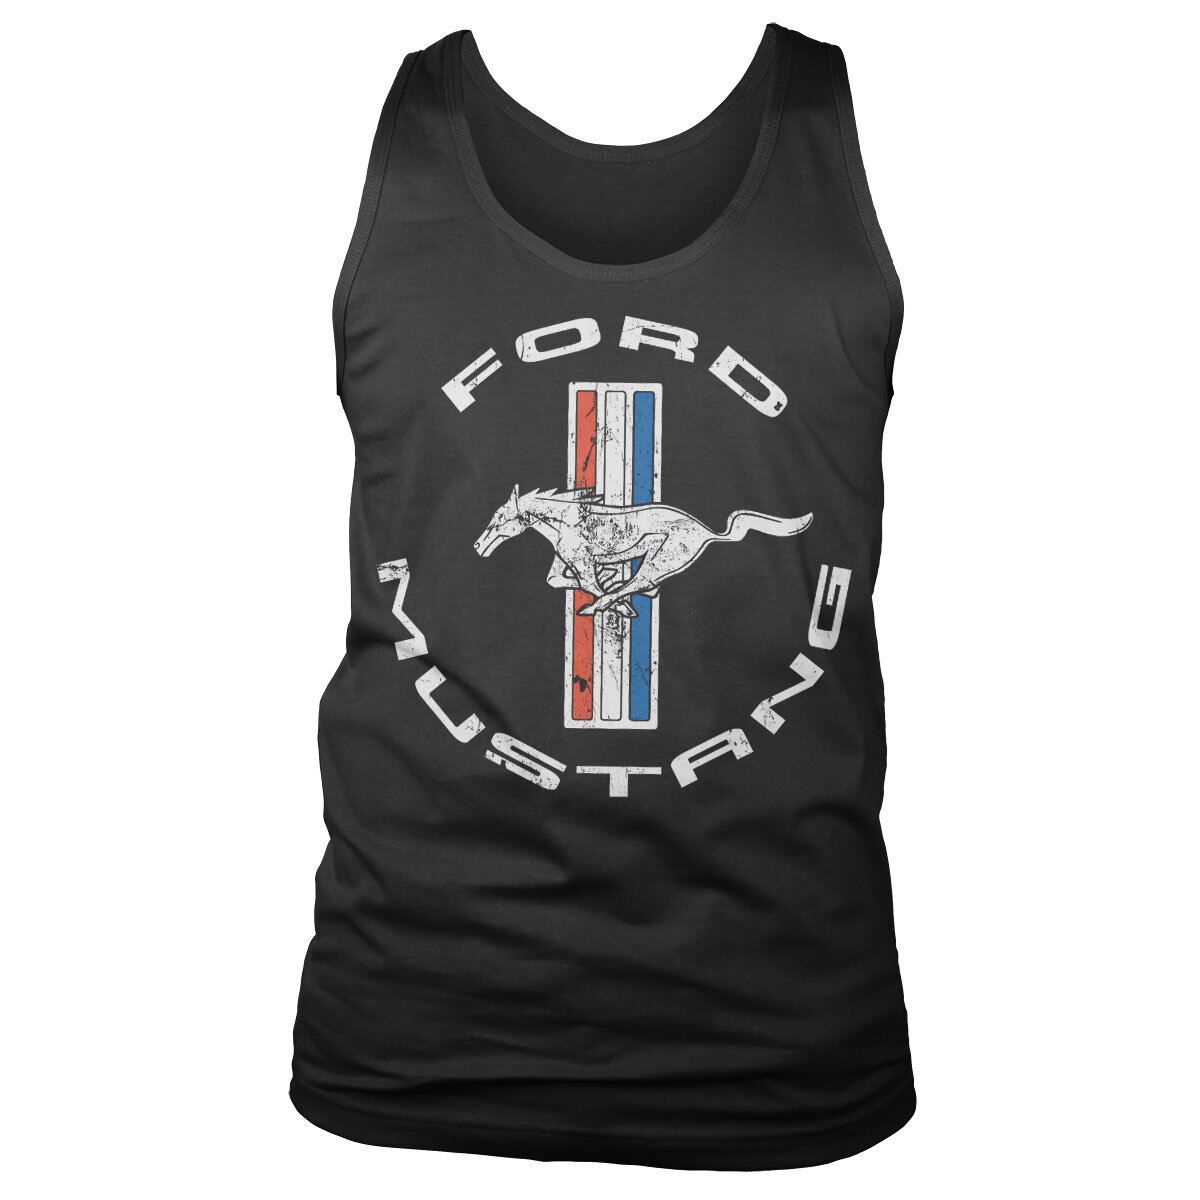 Ford Mustang Tank Top